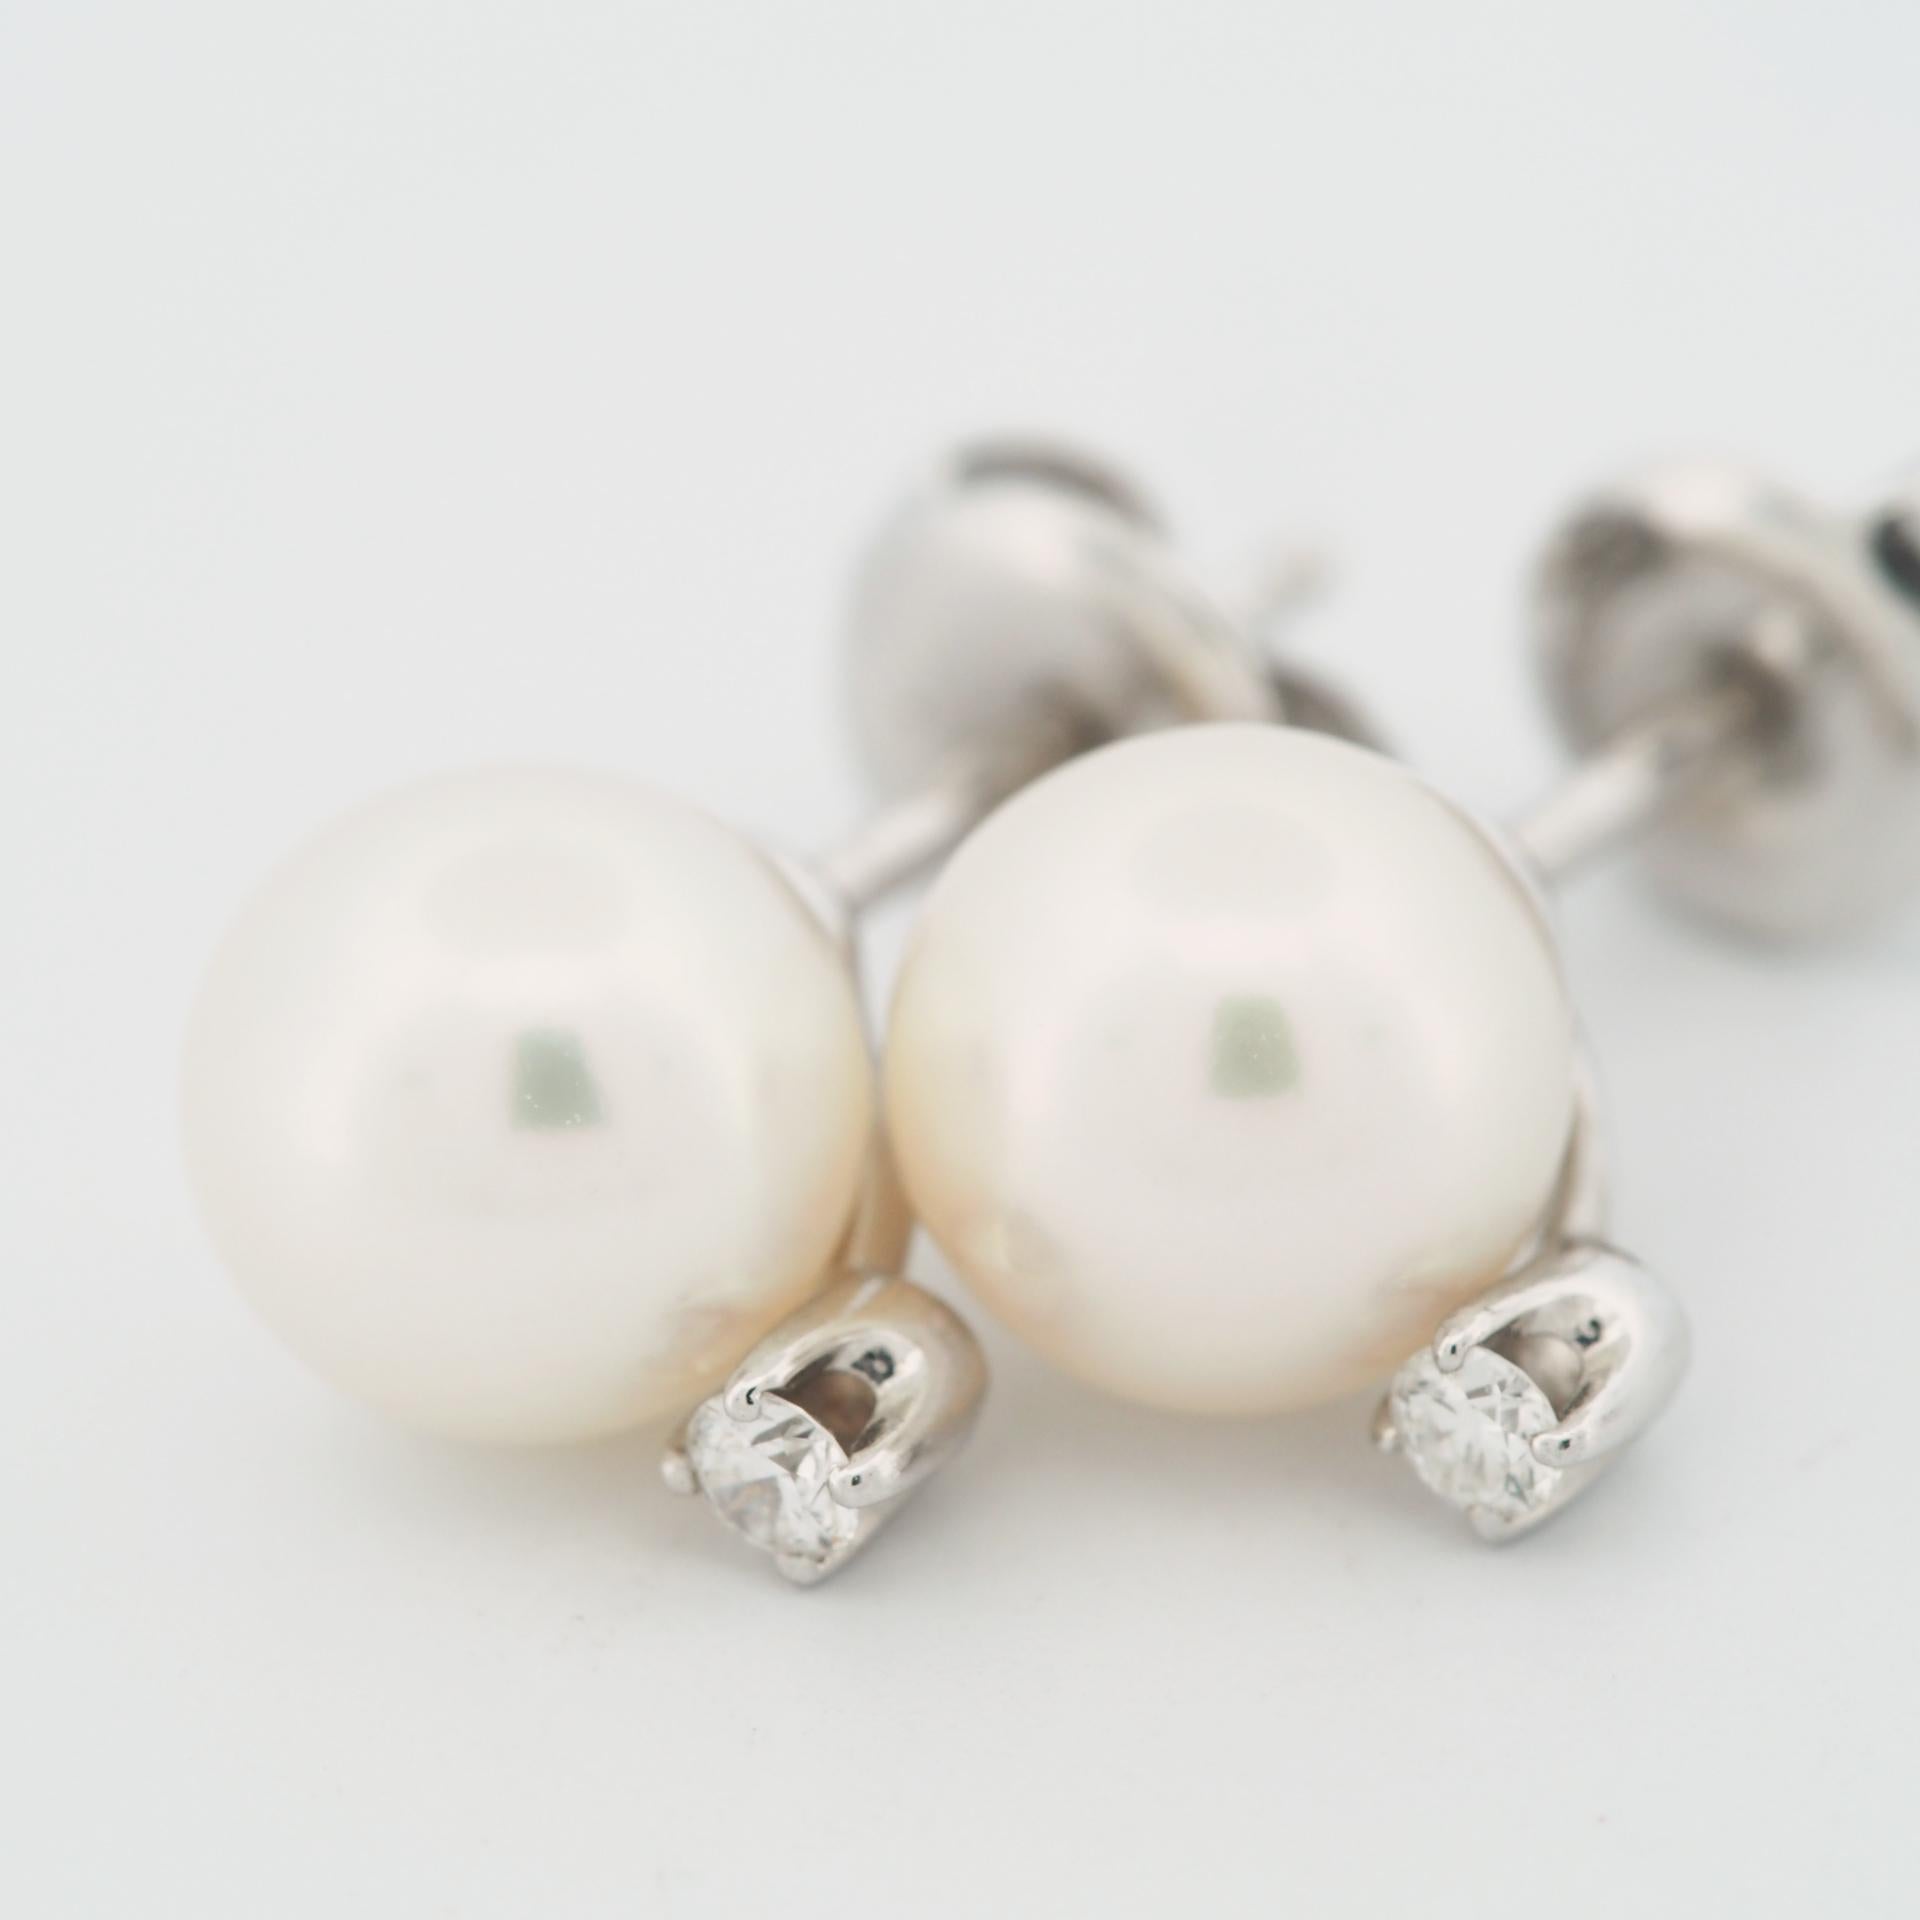 Item: Mikimoto Akoya Pearl Post Earrings
Stones: 7.25mm Akoya Pearl / Diamond (0.02ct × 2)
Metal: 18K White Gold
Measurement: 1.0 cm
Weight: 2.4 Grams (total)
Condition: Used (repolished)
Retail Price: ---
Signatures: MIKIMOTO, K18
Accessories: